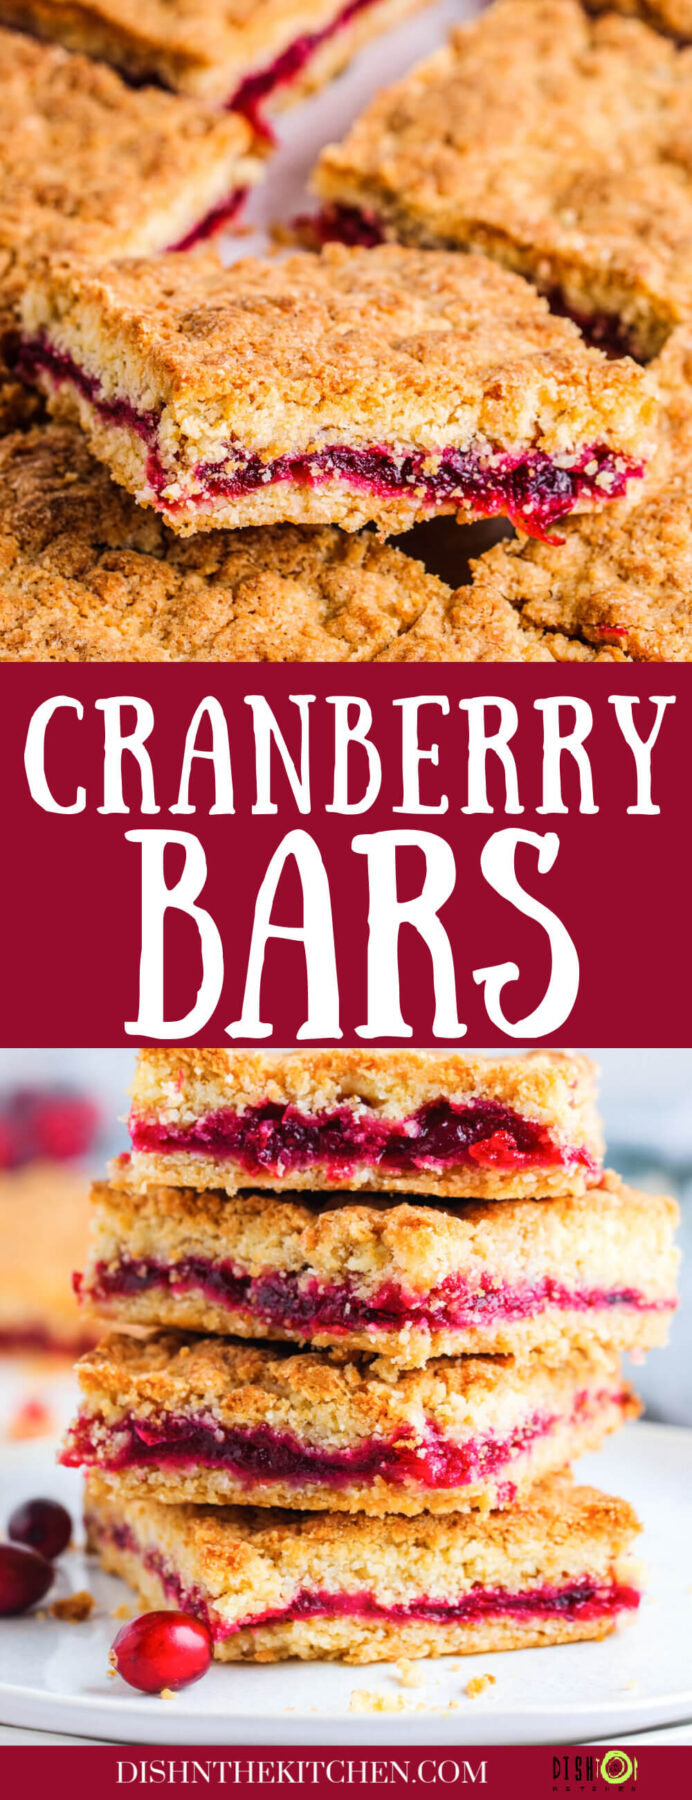 Pinterest image featuring stacks of layered Cranberry Bars on white platters.